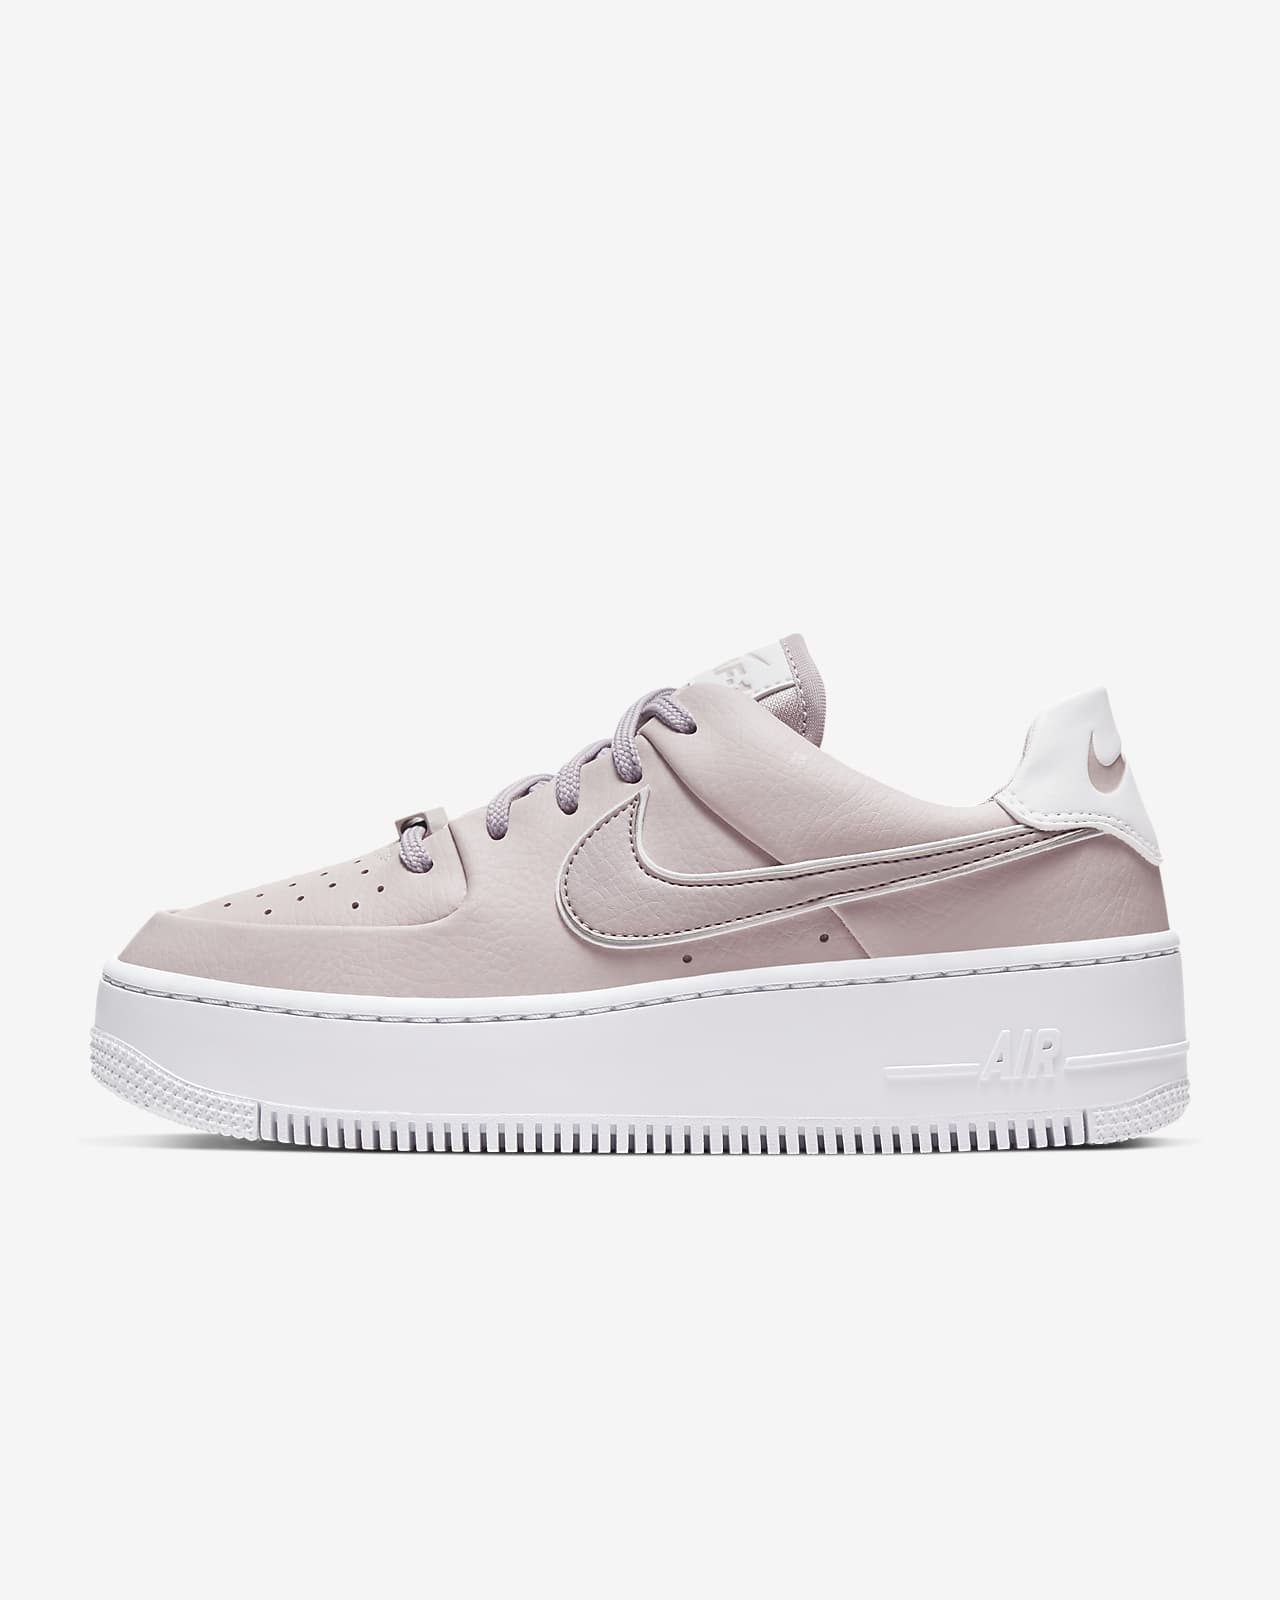 nike air force 1 womens in store near me